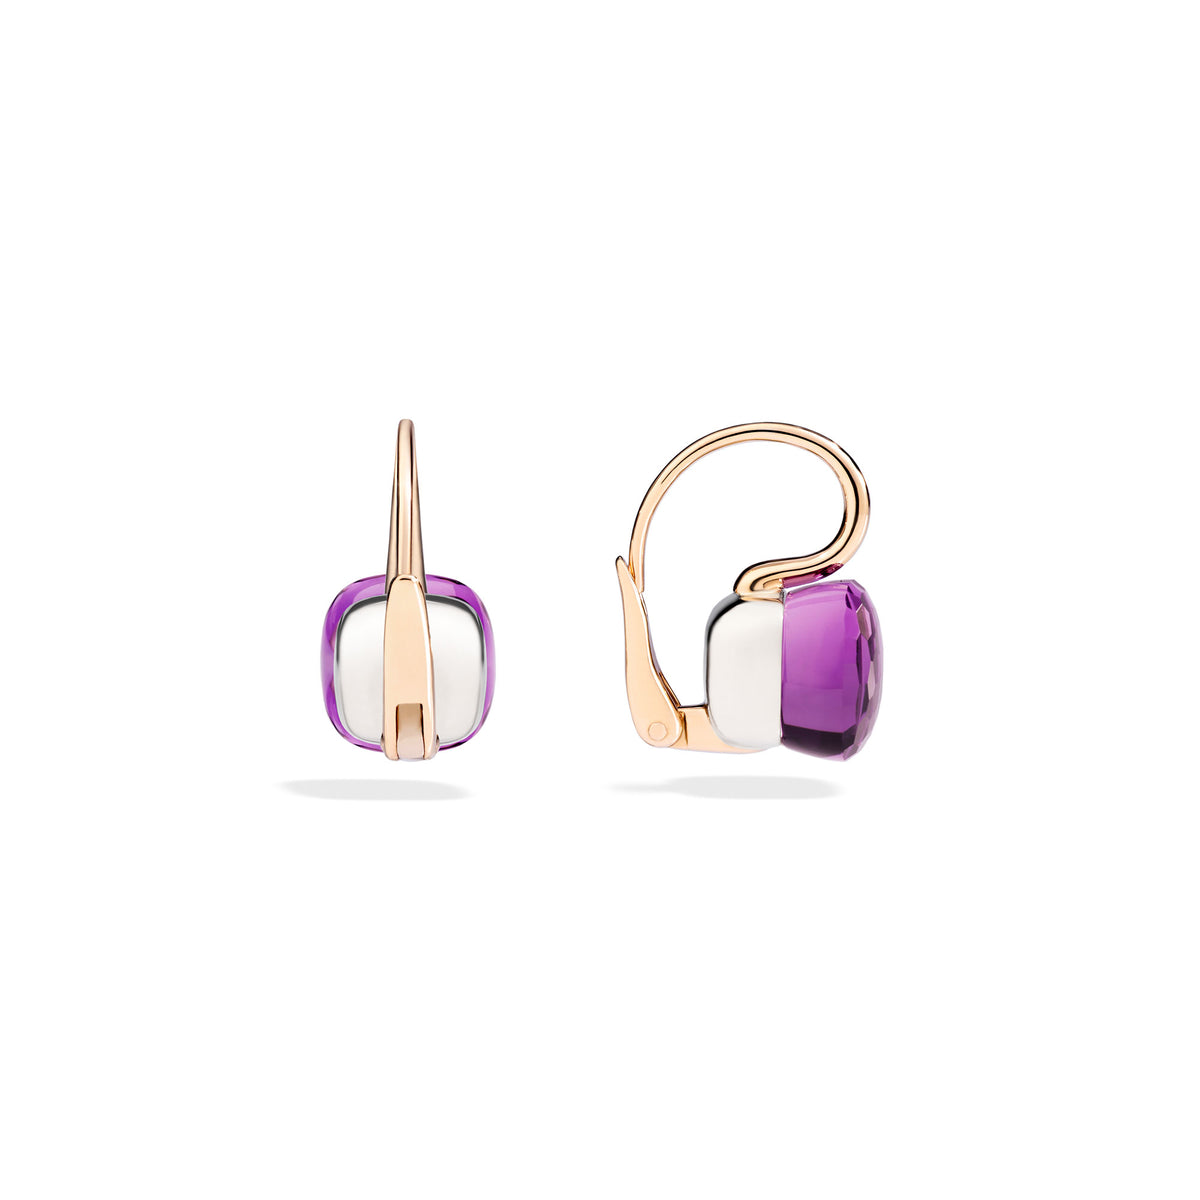 Nudo Classic Earrings in 18K Rose Gold and White Gold with Amethyst - Orsini Jewellers NZ